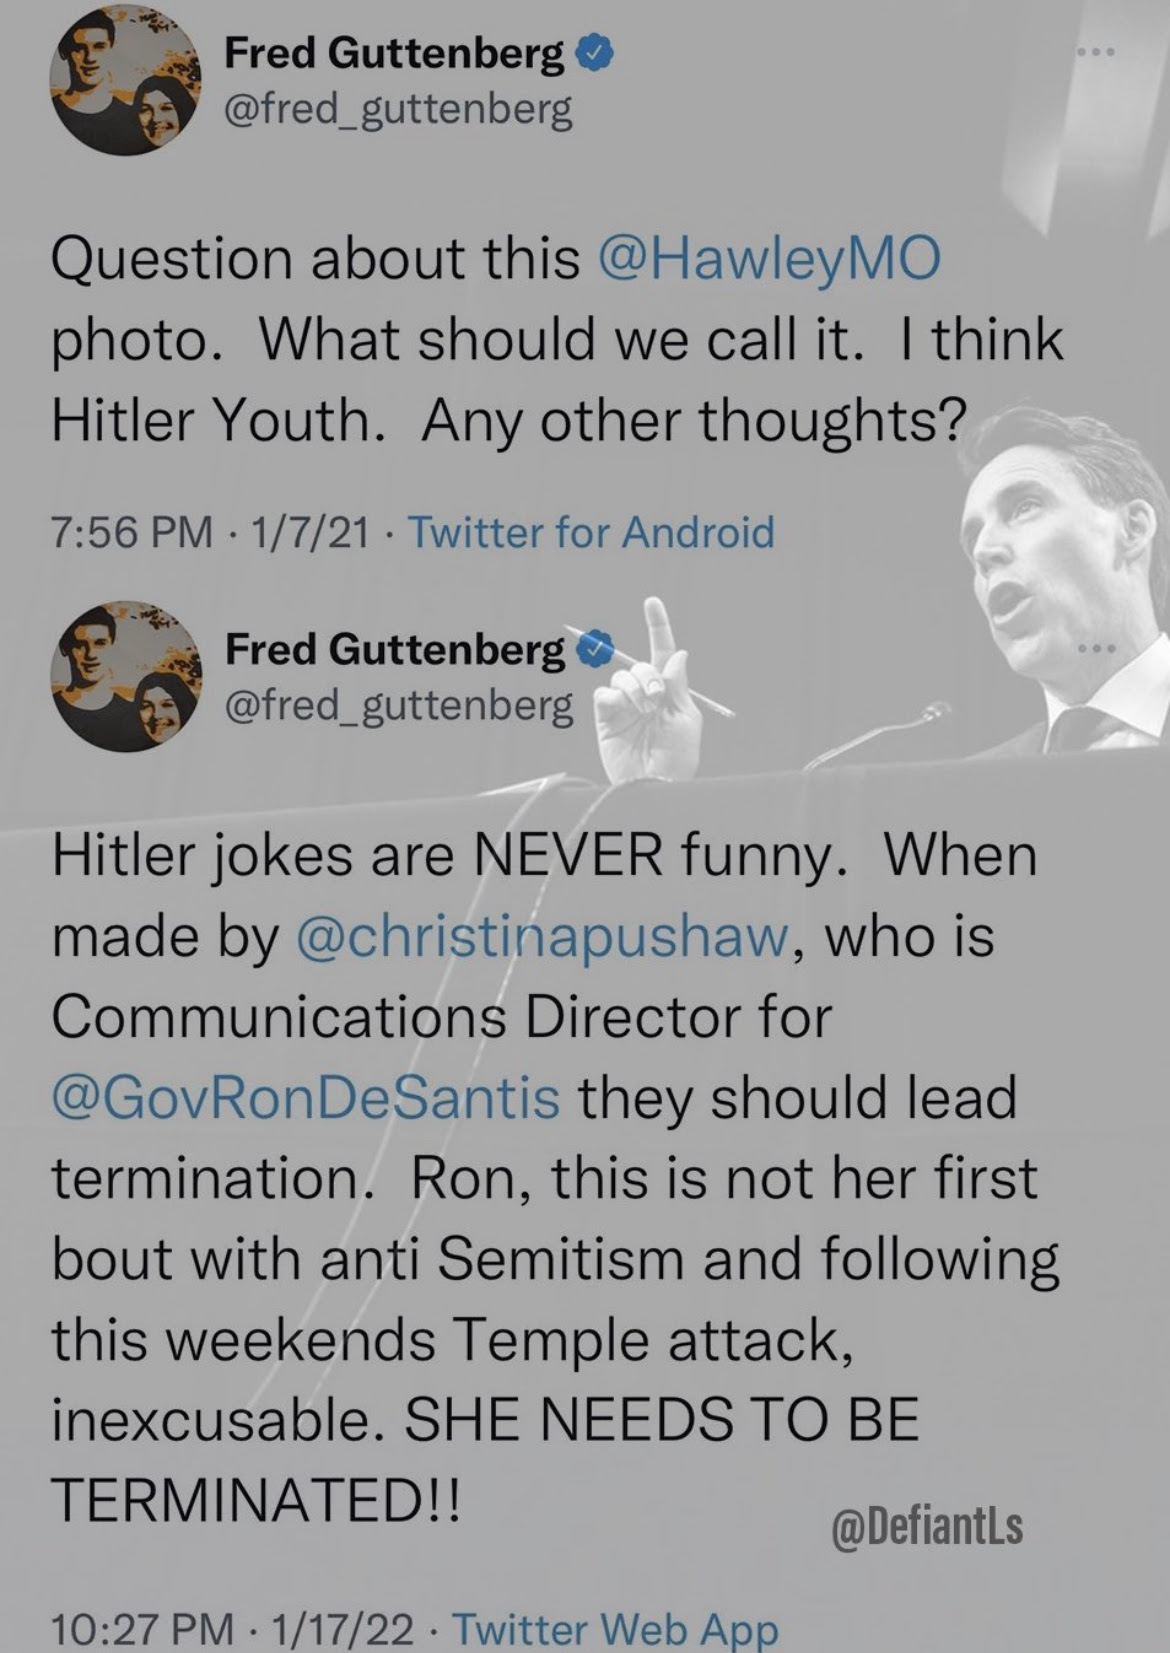 Hypocrite Fred Guttenberg. Says Hitler jokes are never funny after doing one himself a year earlier.